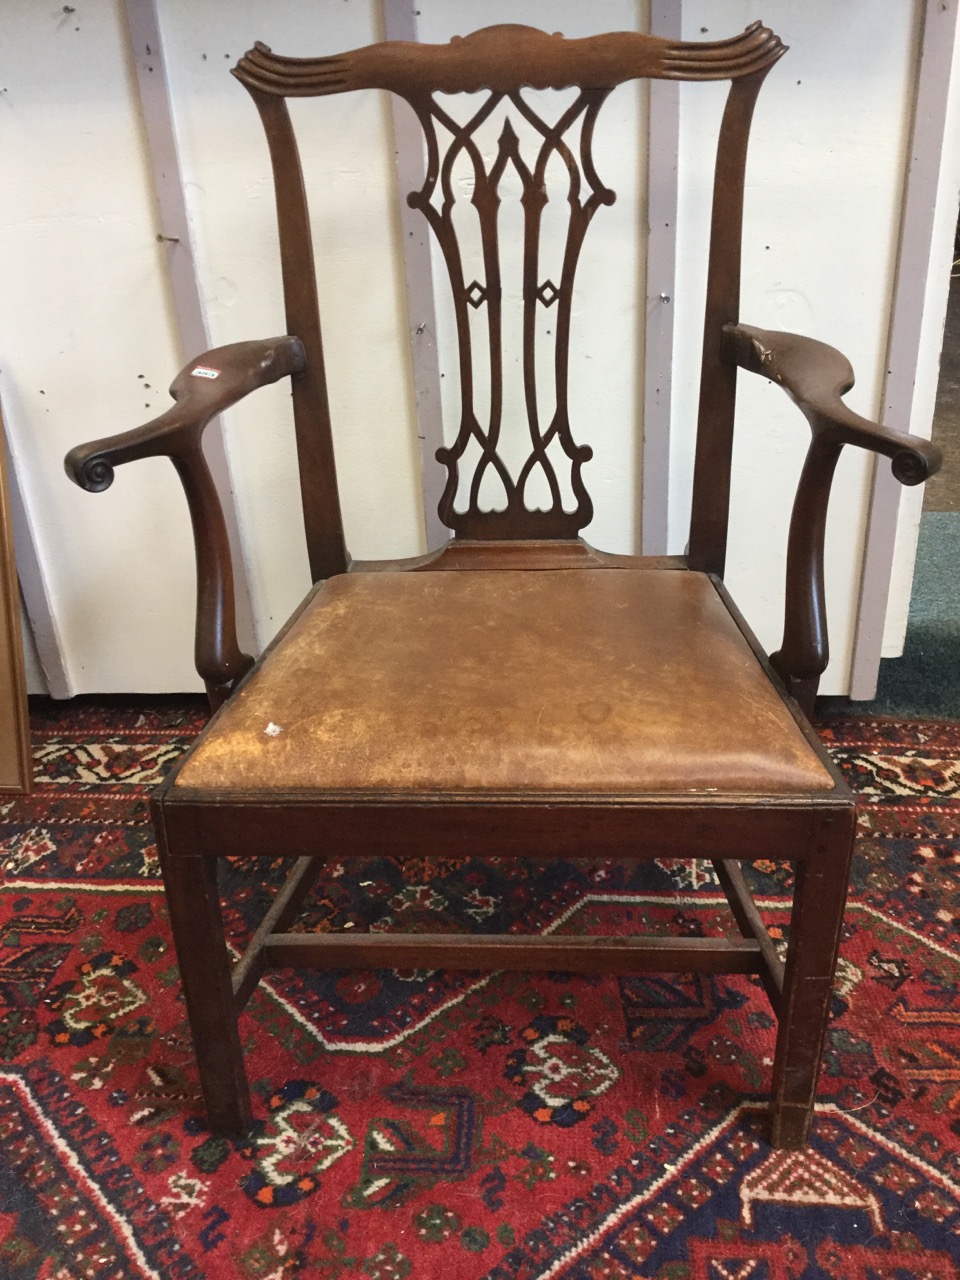 A Chippendale style Victorian mahogany open armchair, the back with fretwork pierced splat beneath - Image 2 of 3